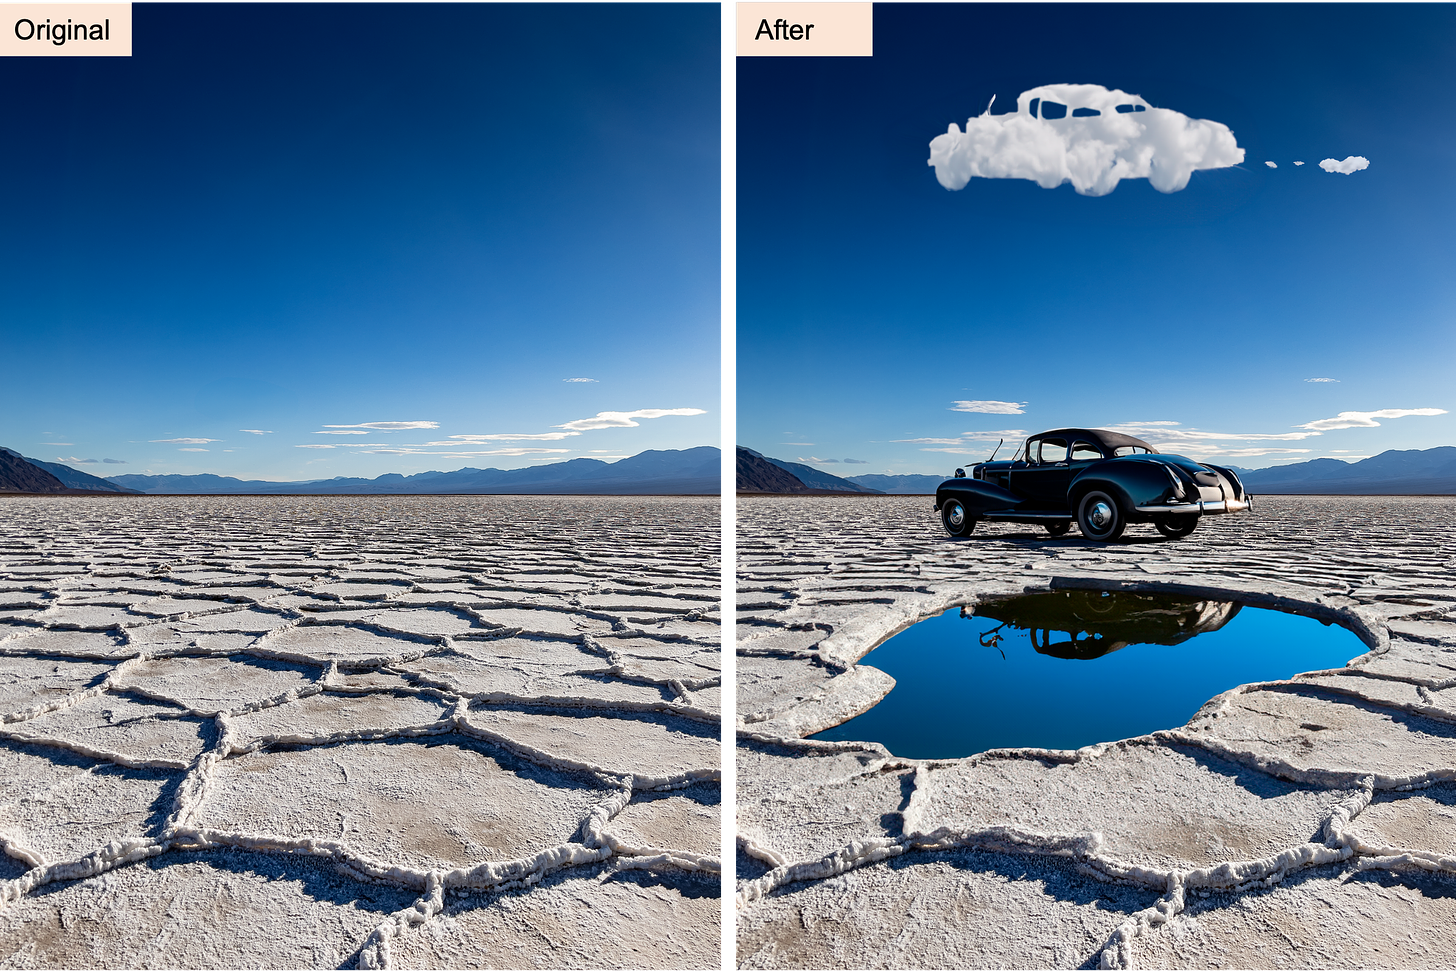 A before and after comparison of an image editing using Photoshop’s new Generative Fill feature. A salt plane has been extended, and now features a classic car and a reflective puddle.